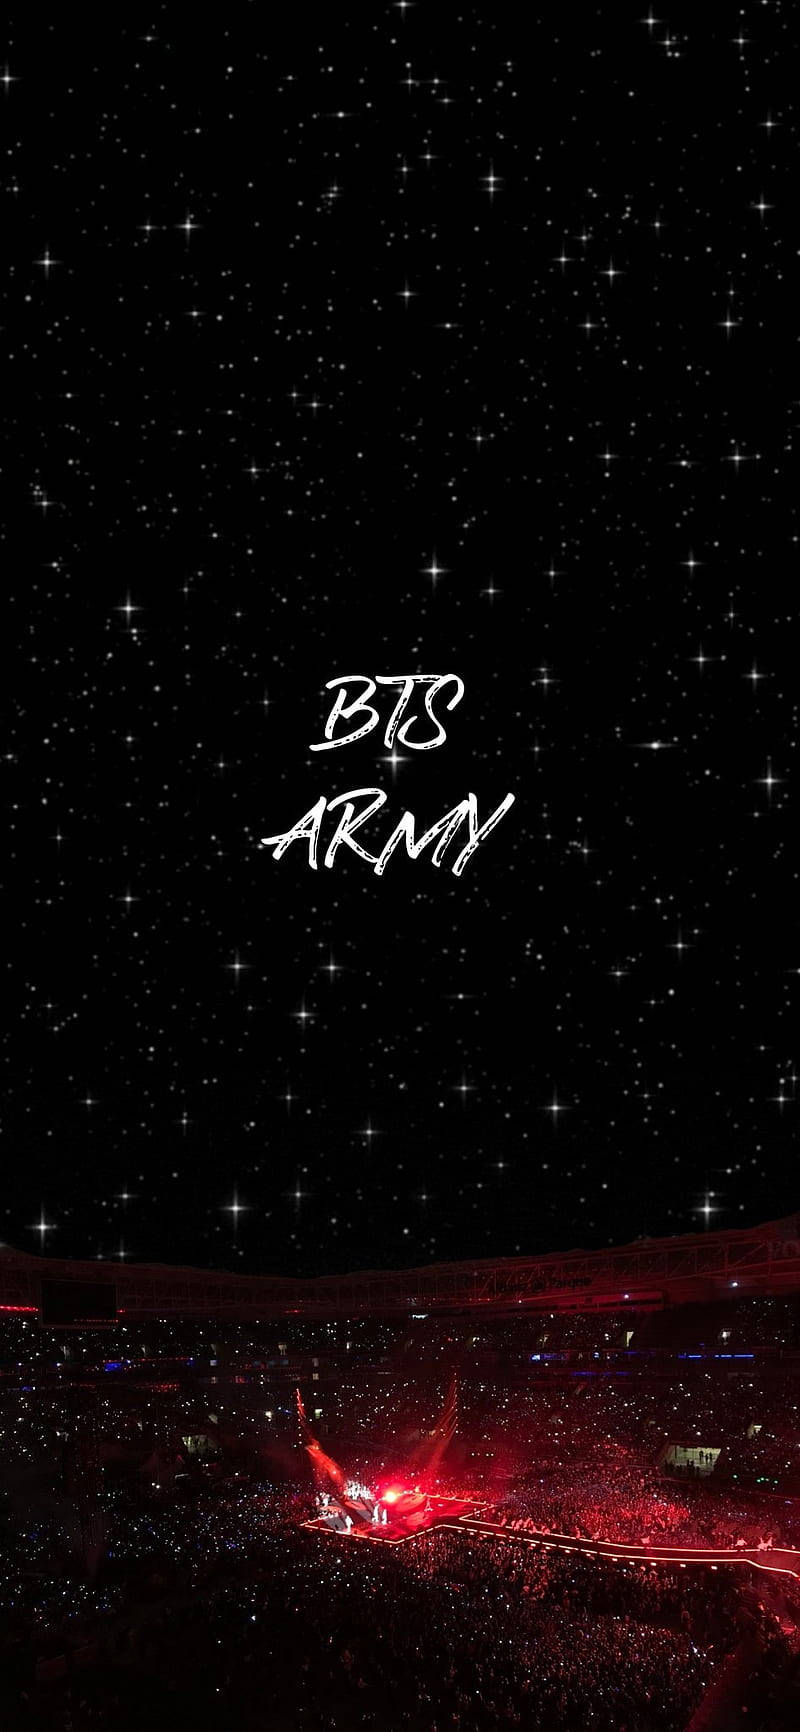 Bts Concert With The Words Bts And Army